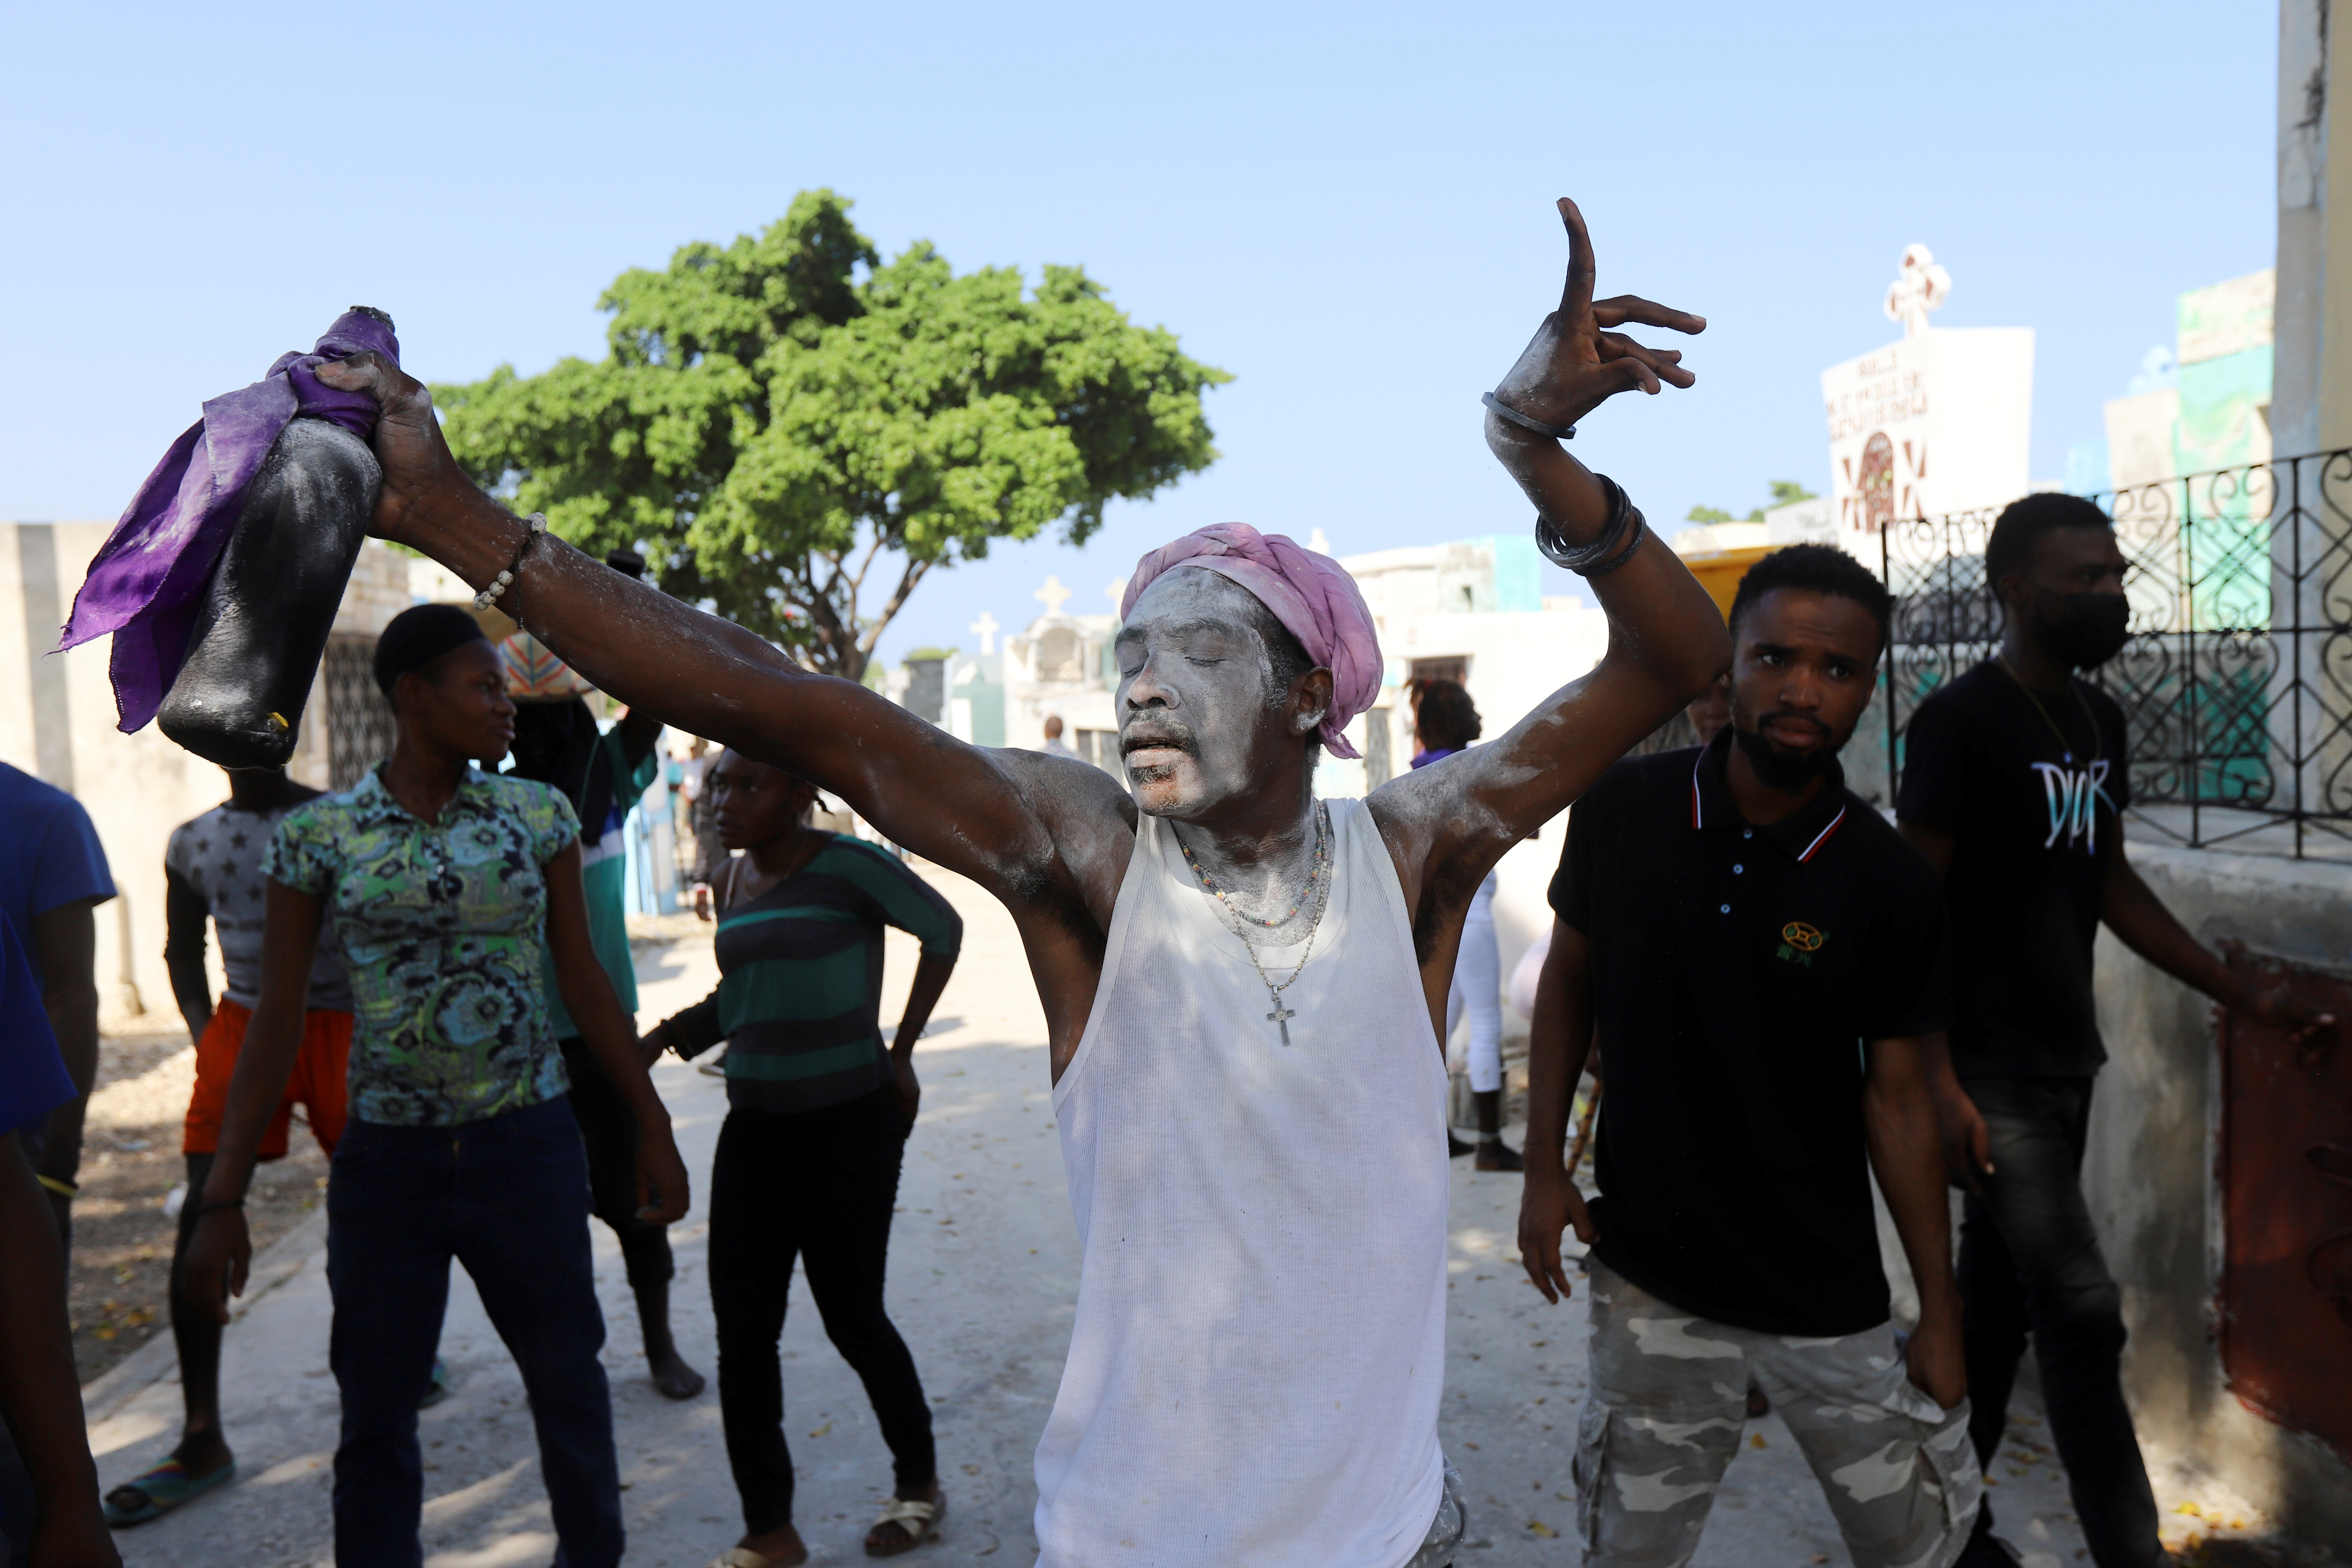 A man with powder on his face dances during Day of the Dead celebrations at a cemetery, in Port-au-Prince, Haiti November 1, 2021. REUTERS/Ralph Tedy Erol